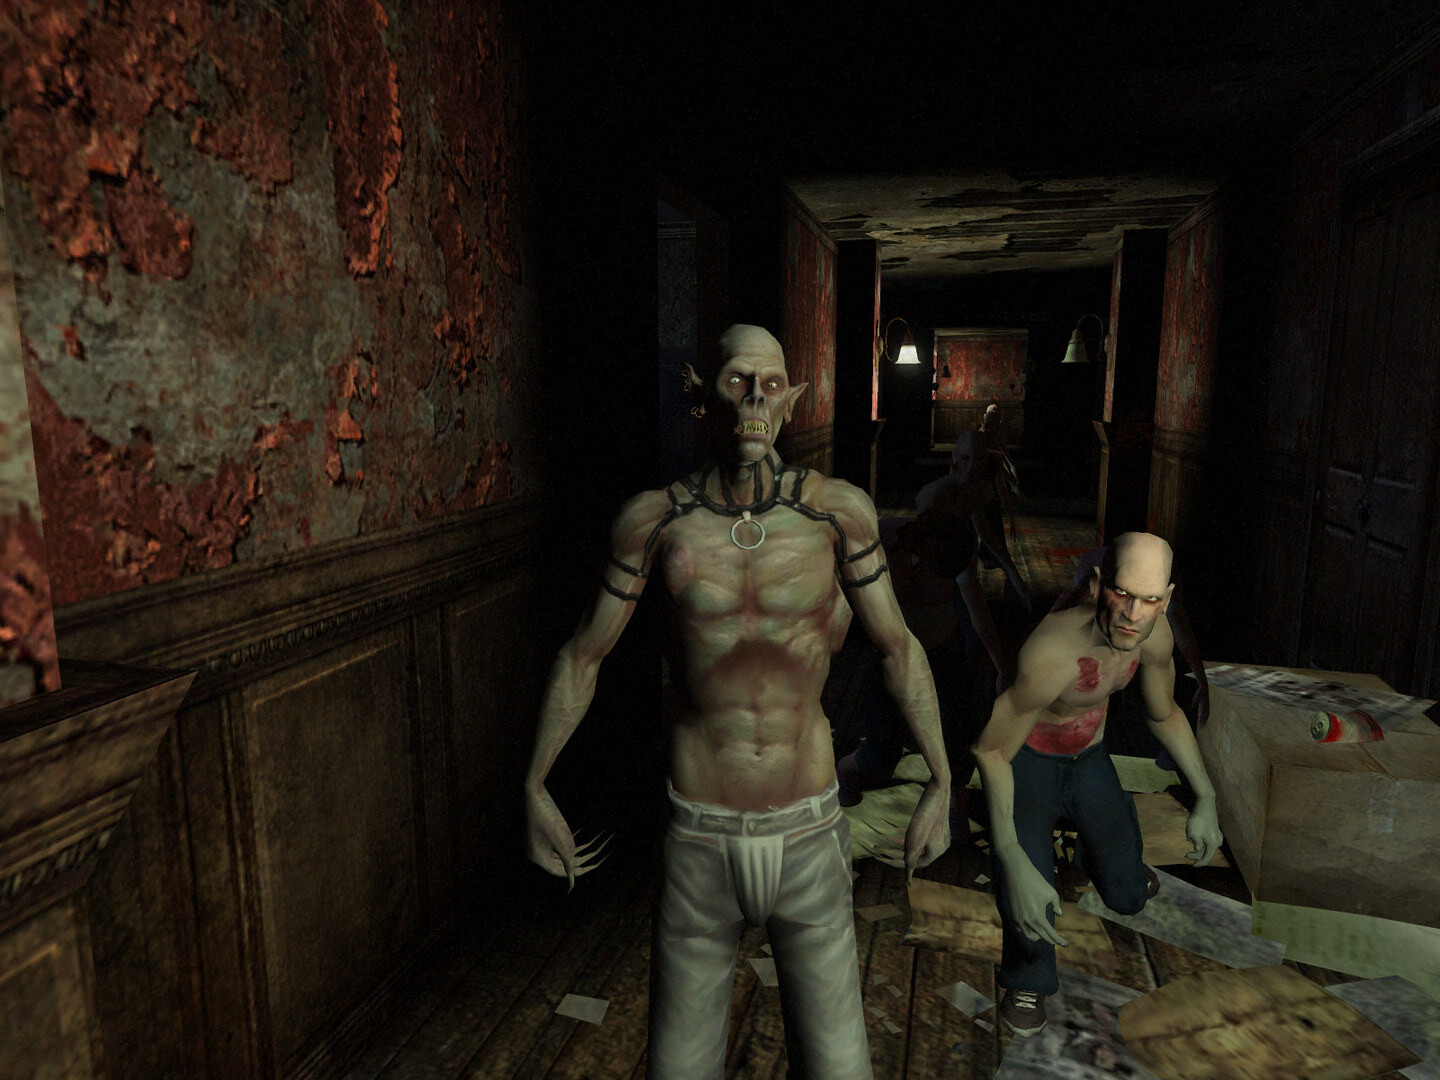 Vampire: The Masquerade - Bloodlines PC Download CD Key